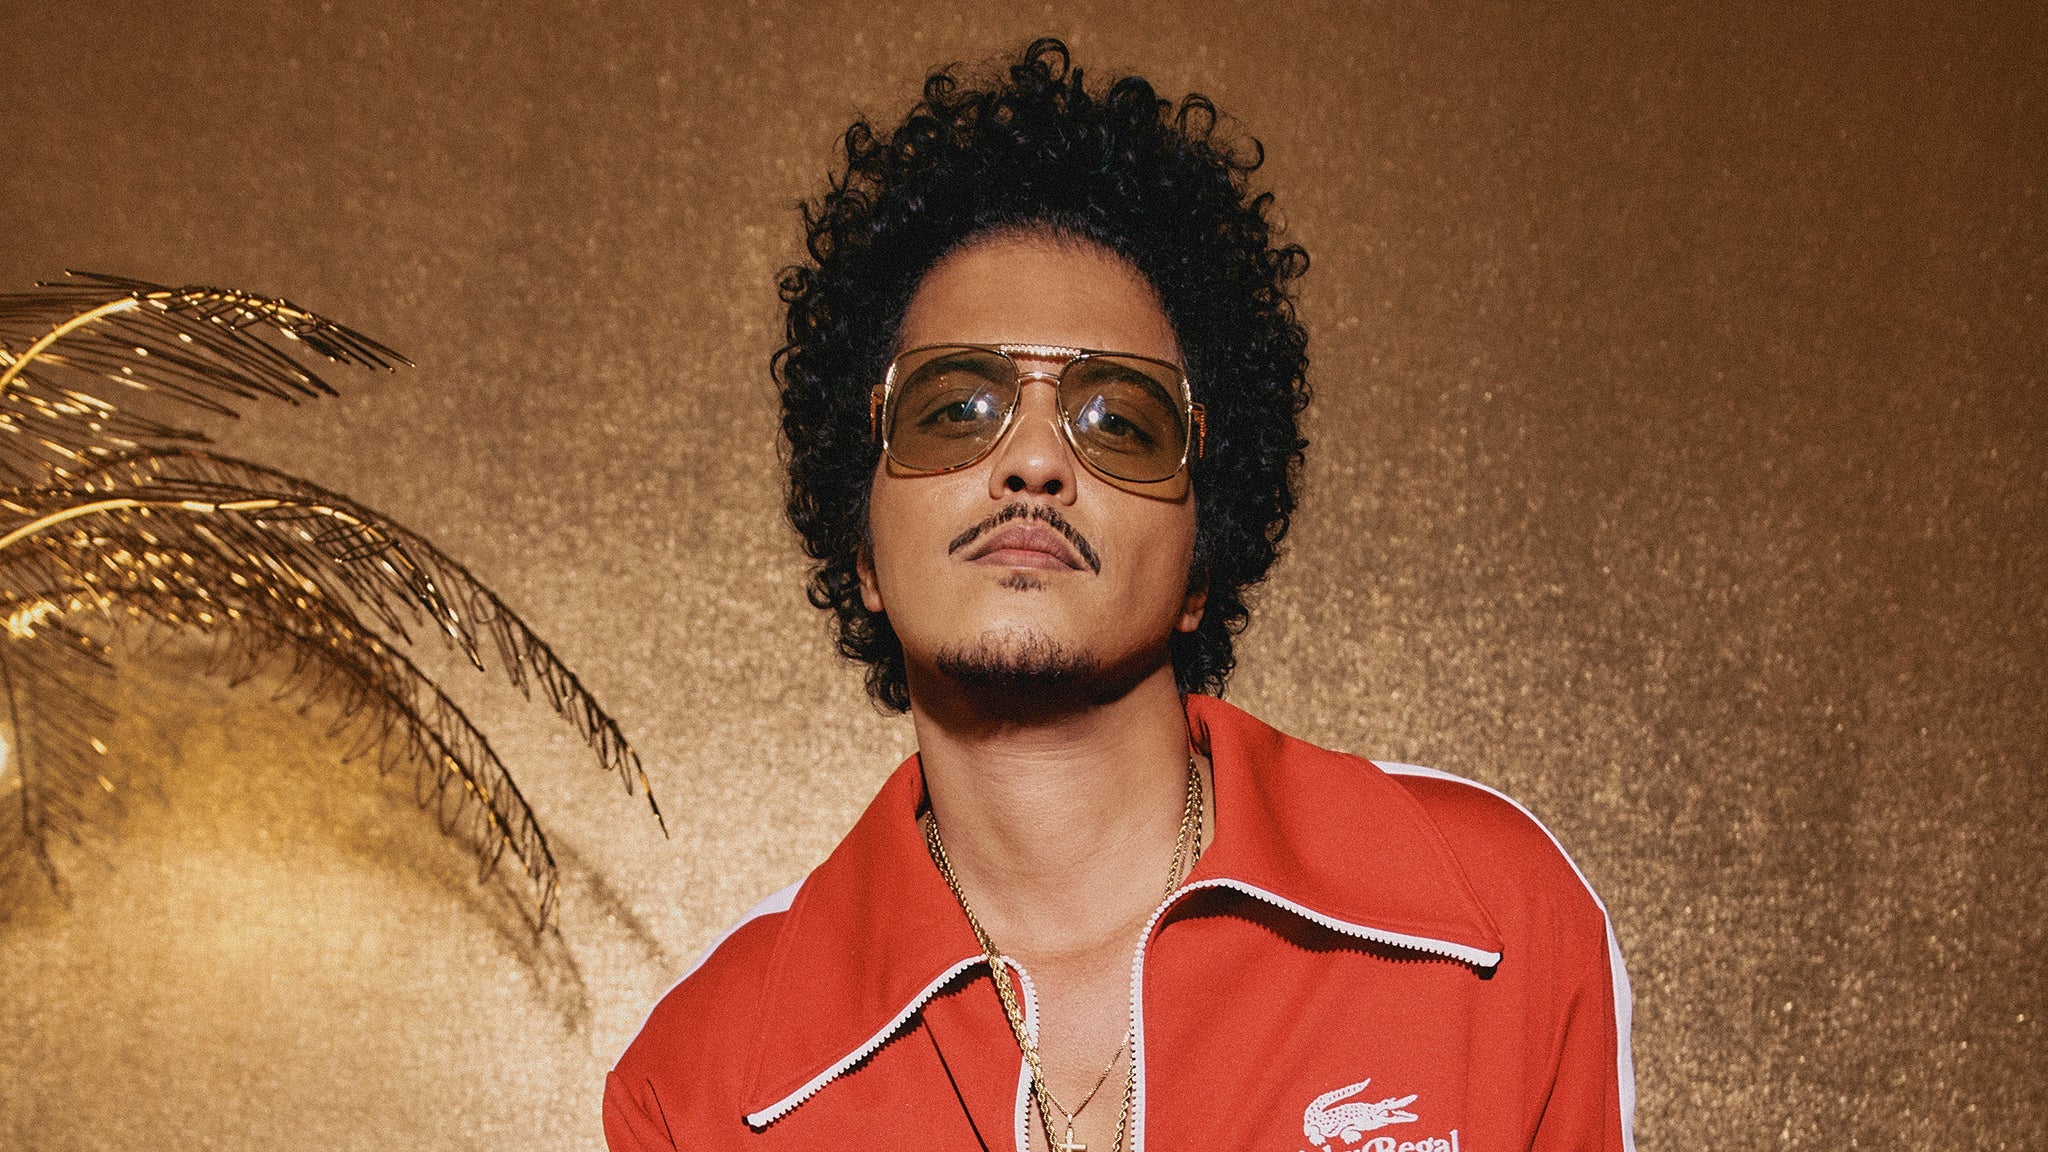 FREE Bruno Mars pre sale ocde The Theater at MGM National Harbor in